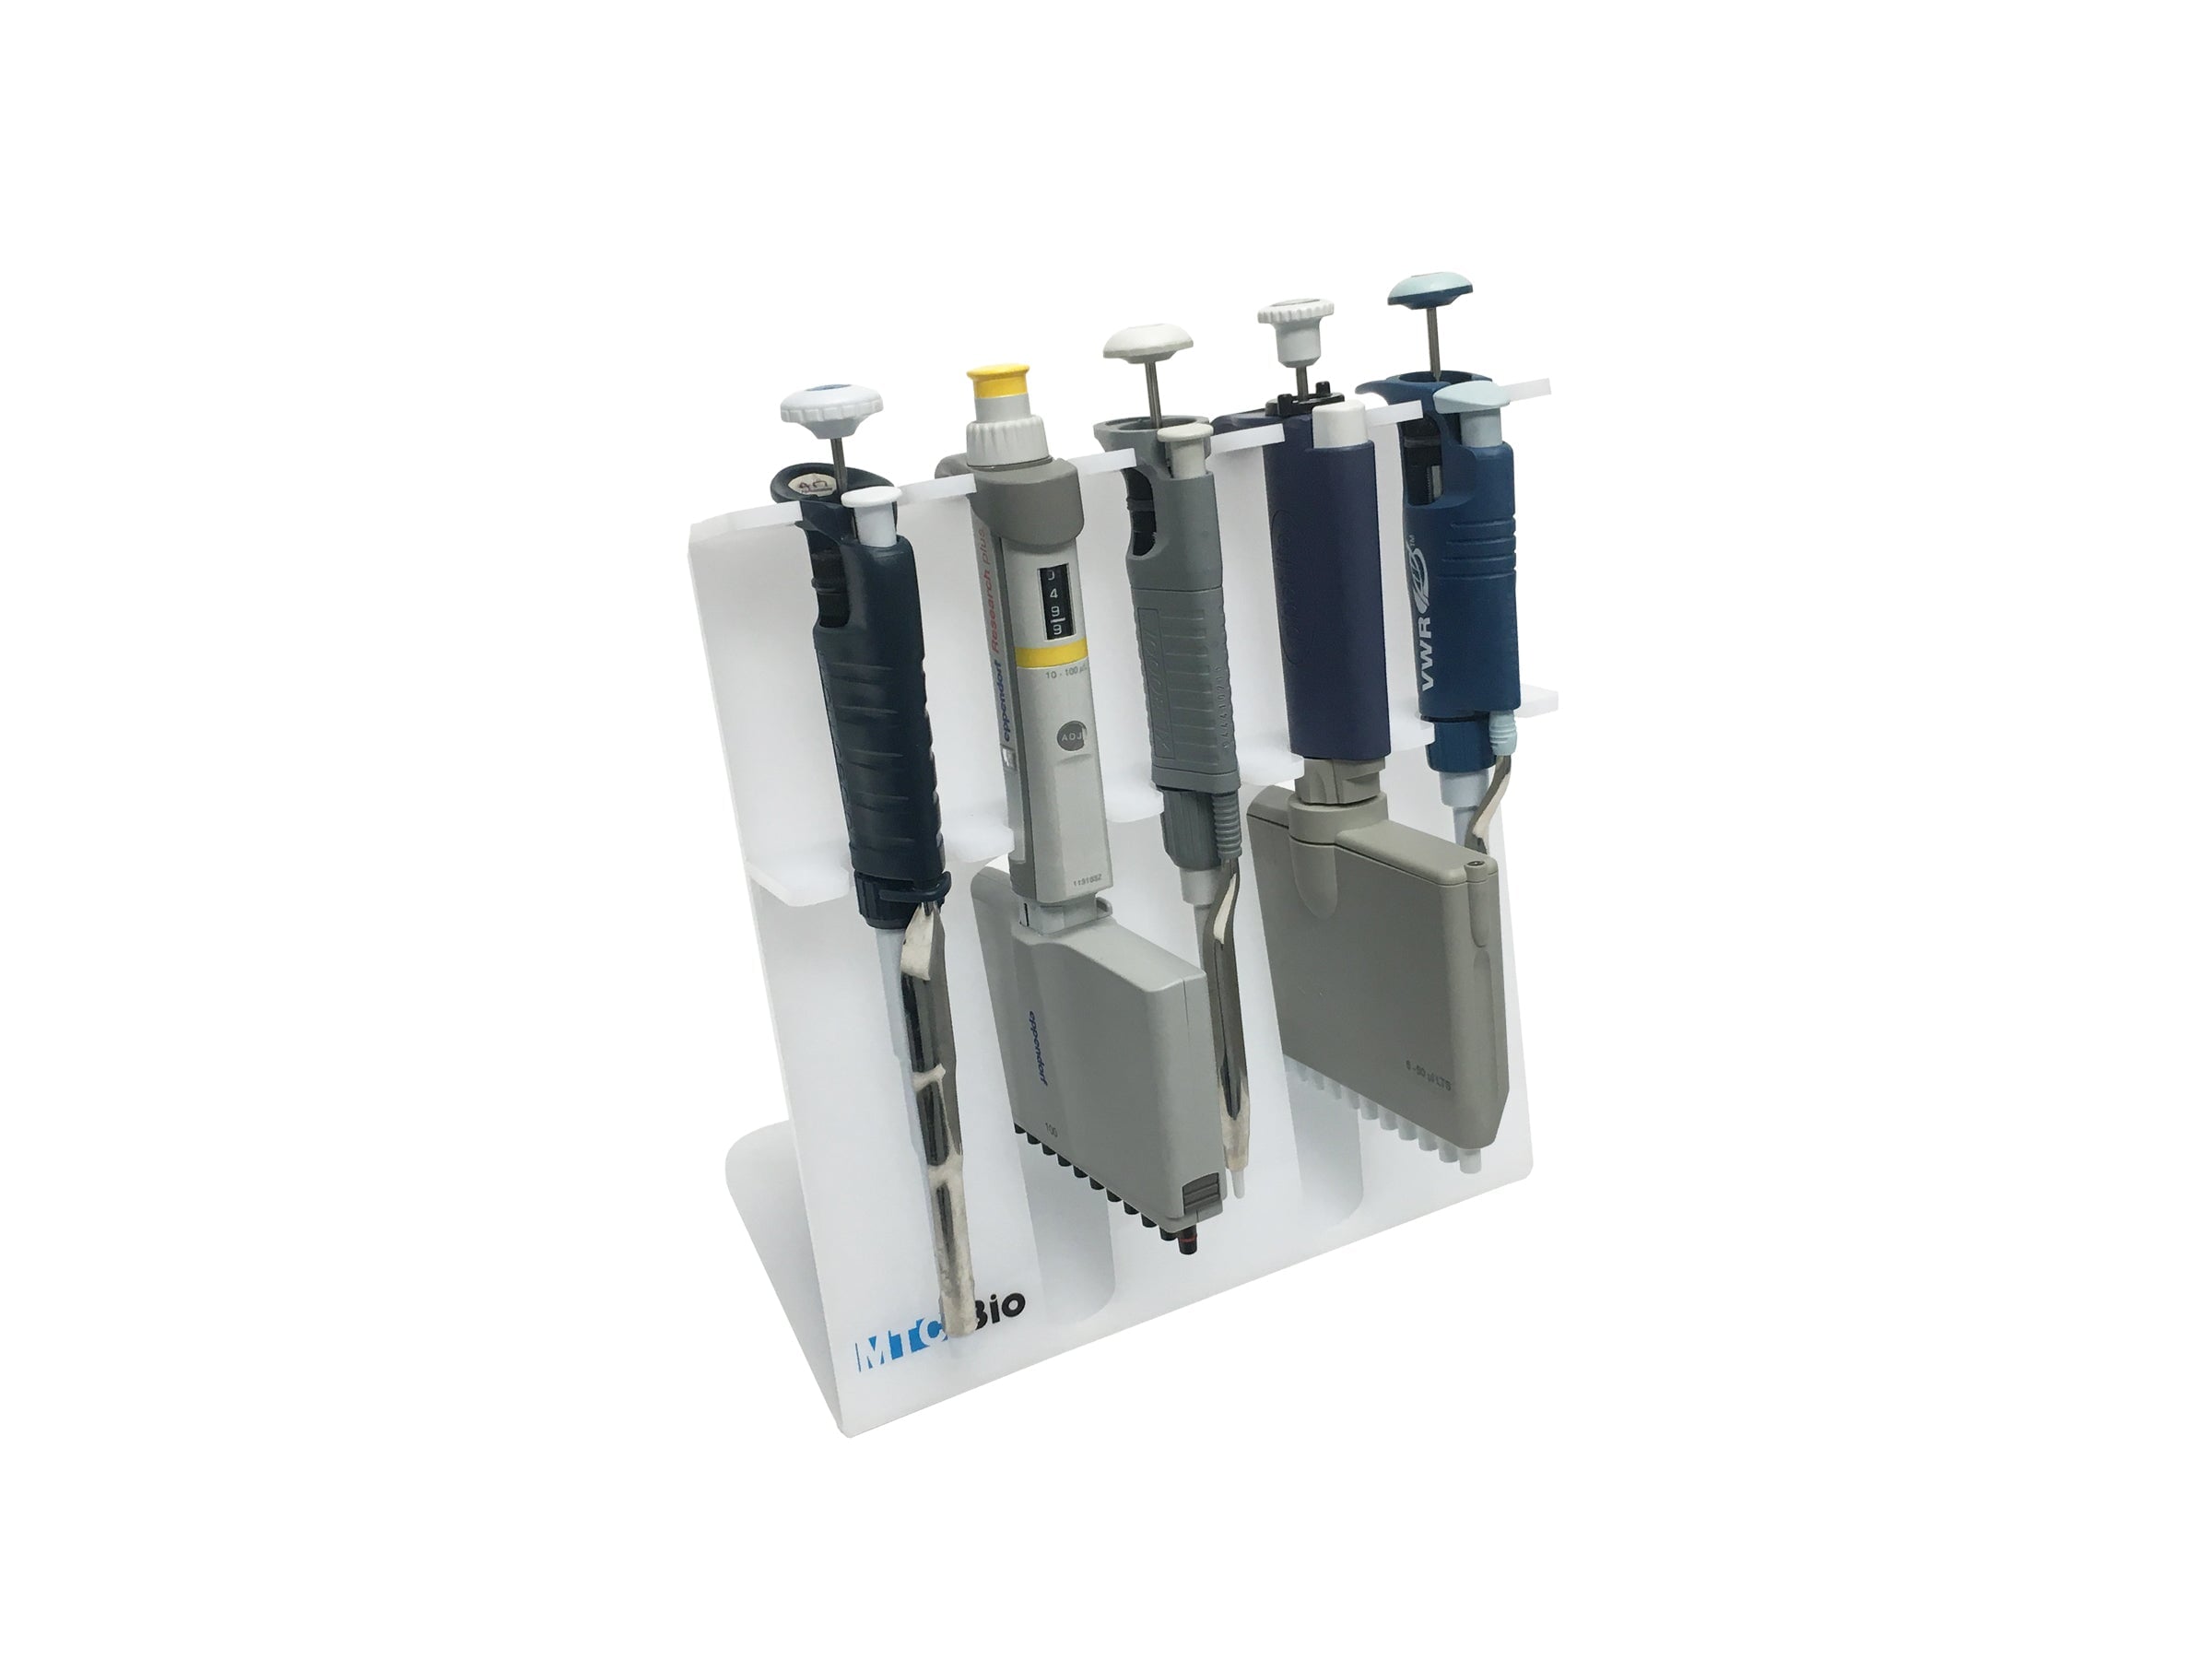 MTC Bio P4405 SureStand™ Pipette Stand for 5 pipettes, up to two multi-channels, acrylic